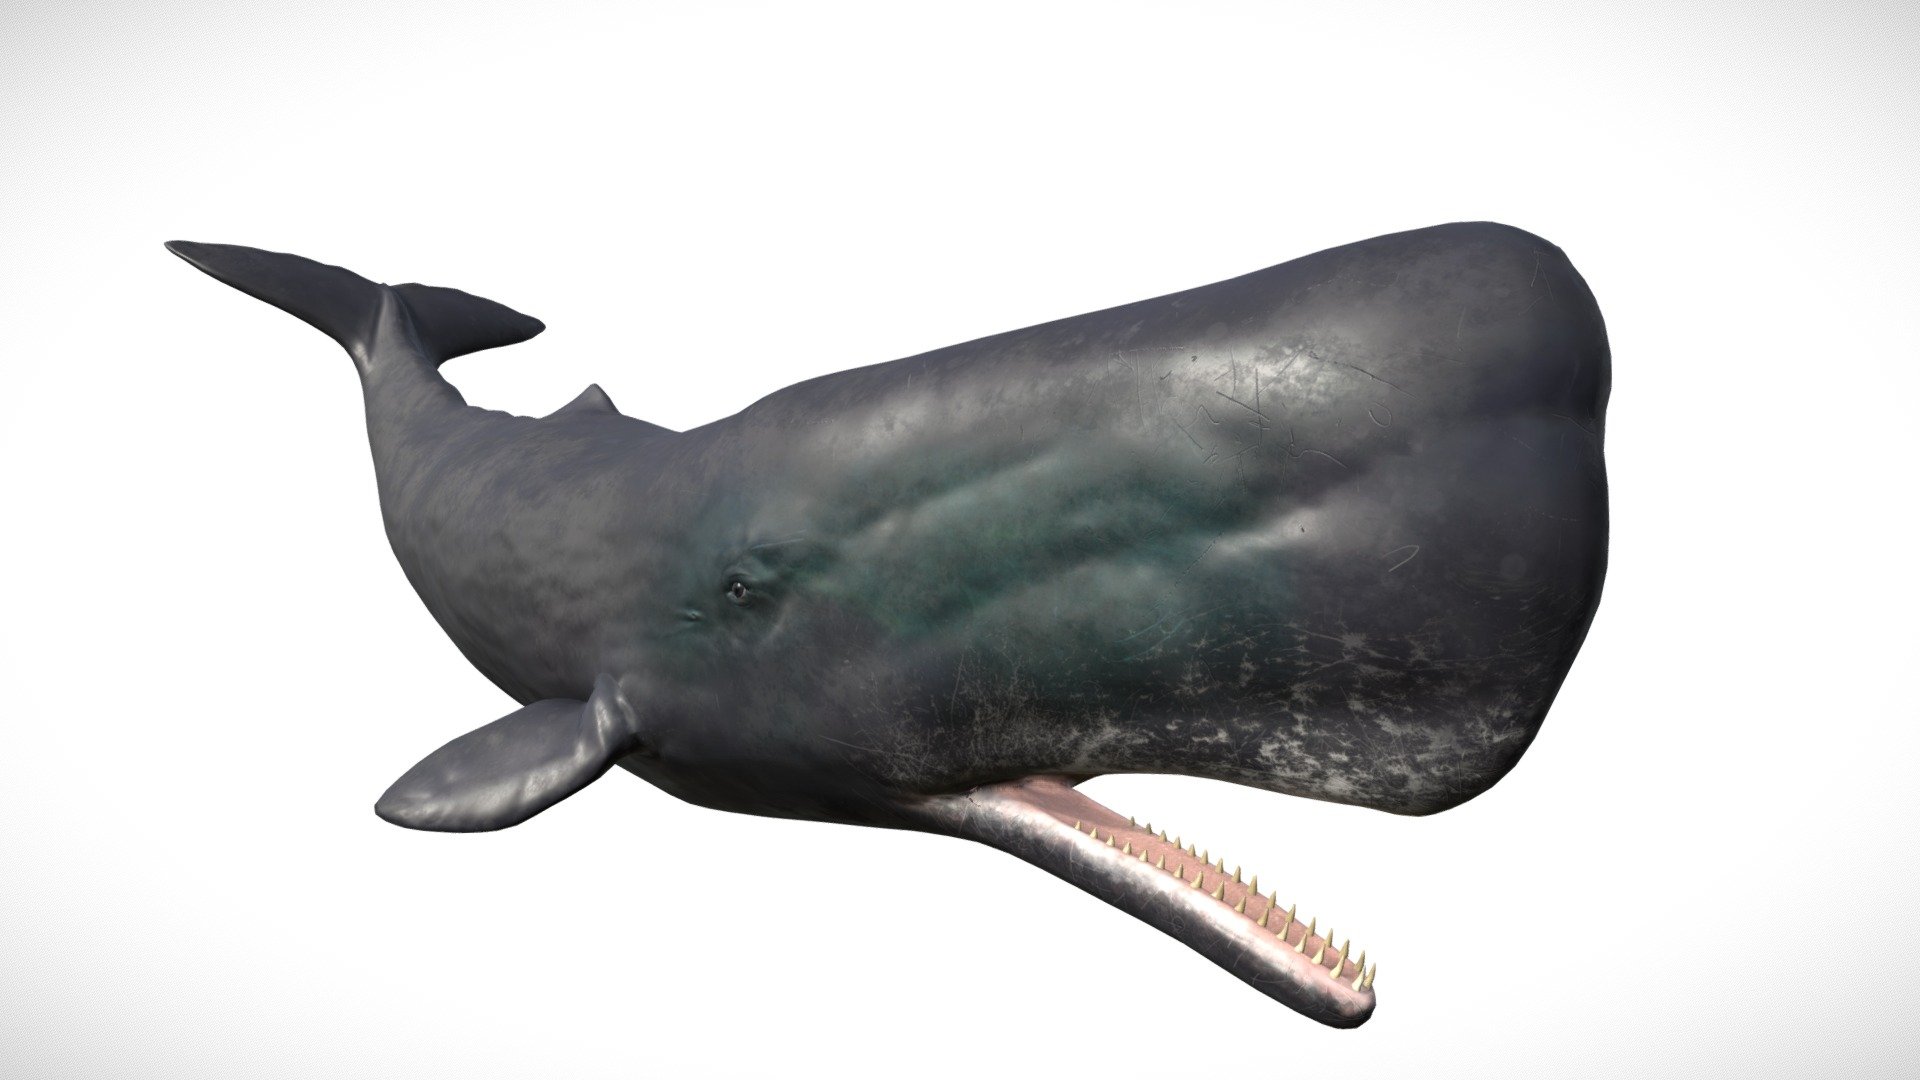 This sperm whale comes with the following Animations:




Swim

Idle

Pose Left

Pose Right

Pose Jaw Open

Filetypes included are




Unreal Engine 4.16 Project with Spline System and Underwater scene included

FBX Files

3DS Max 2019

The model comes with 4 LODs ranging from 26,600 to 900 vertices.


---- Unreal Engine Details ----
Download UE4 Demo

This Sperm Whale comes with a procedural spline animation system that produces dynamic acceleration, turning and rolling along splines. The whale’s mouth optionally opens when it nears the player or animates on its own. The whale also makes its natural &lsquo;clicking noises' at random intervals (4 sounds included), and the package also contains an underwater background sound with a school of sperm whales for added ambiance. It comes with an additional &lsquo;white whale' material, for potential Moby Dick experiences - Sperm Whale - Buy Royalty Free 3D model by Davis3D 3d model